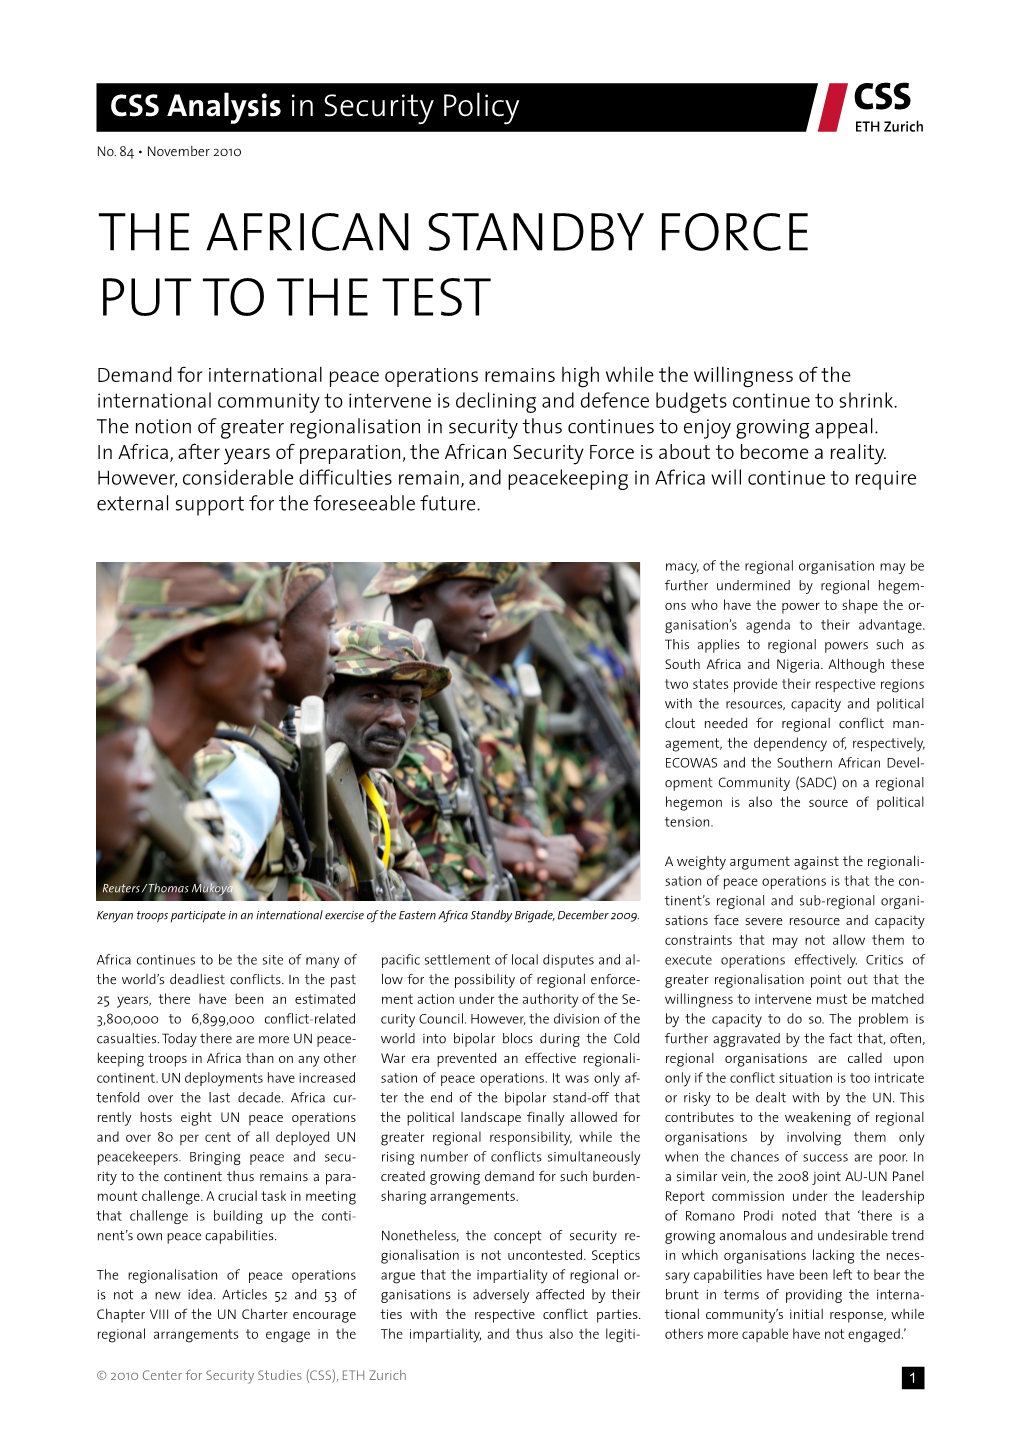 The African Standby Force Put to the Test